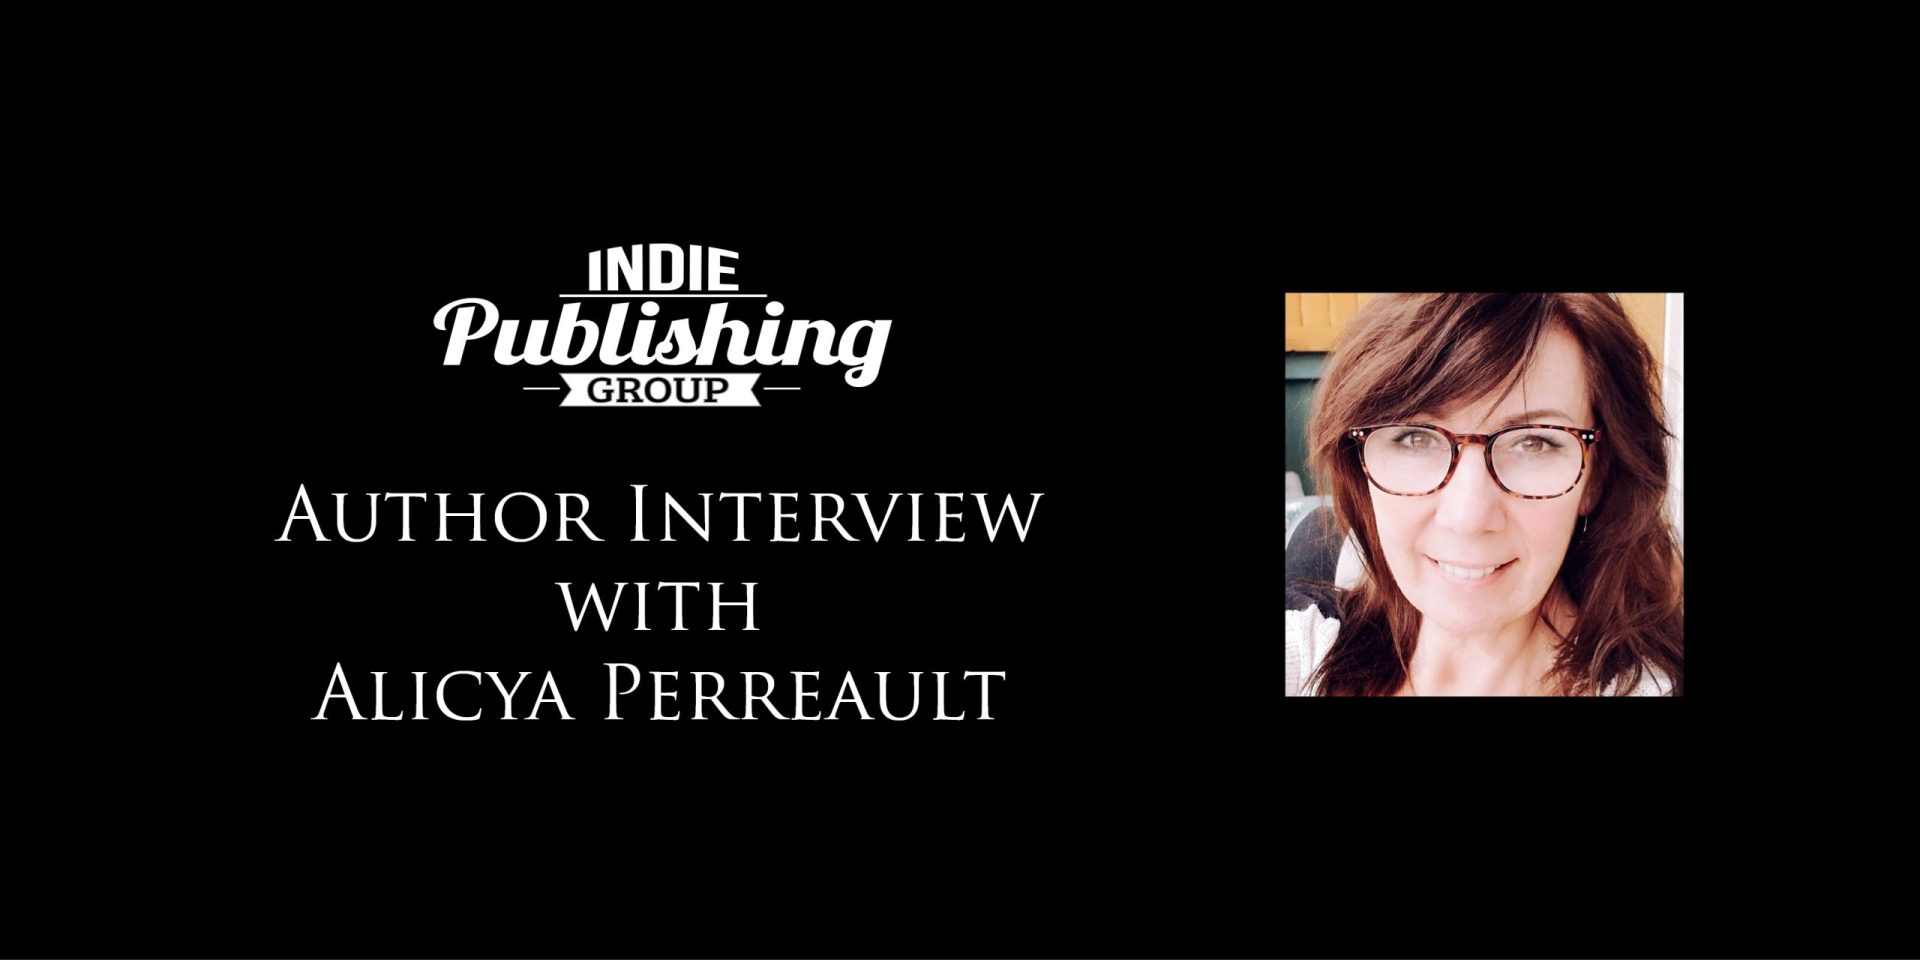 Author Interview with Alicya Perreault!|Alicya Perreault